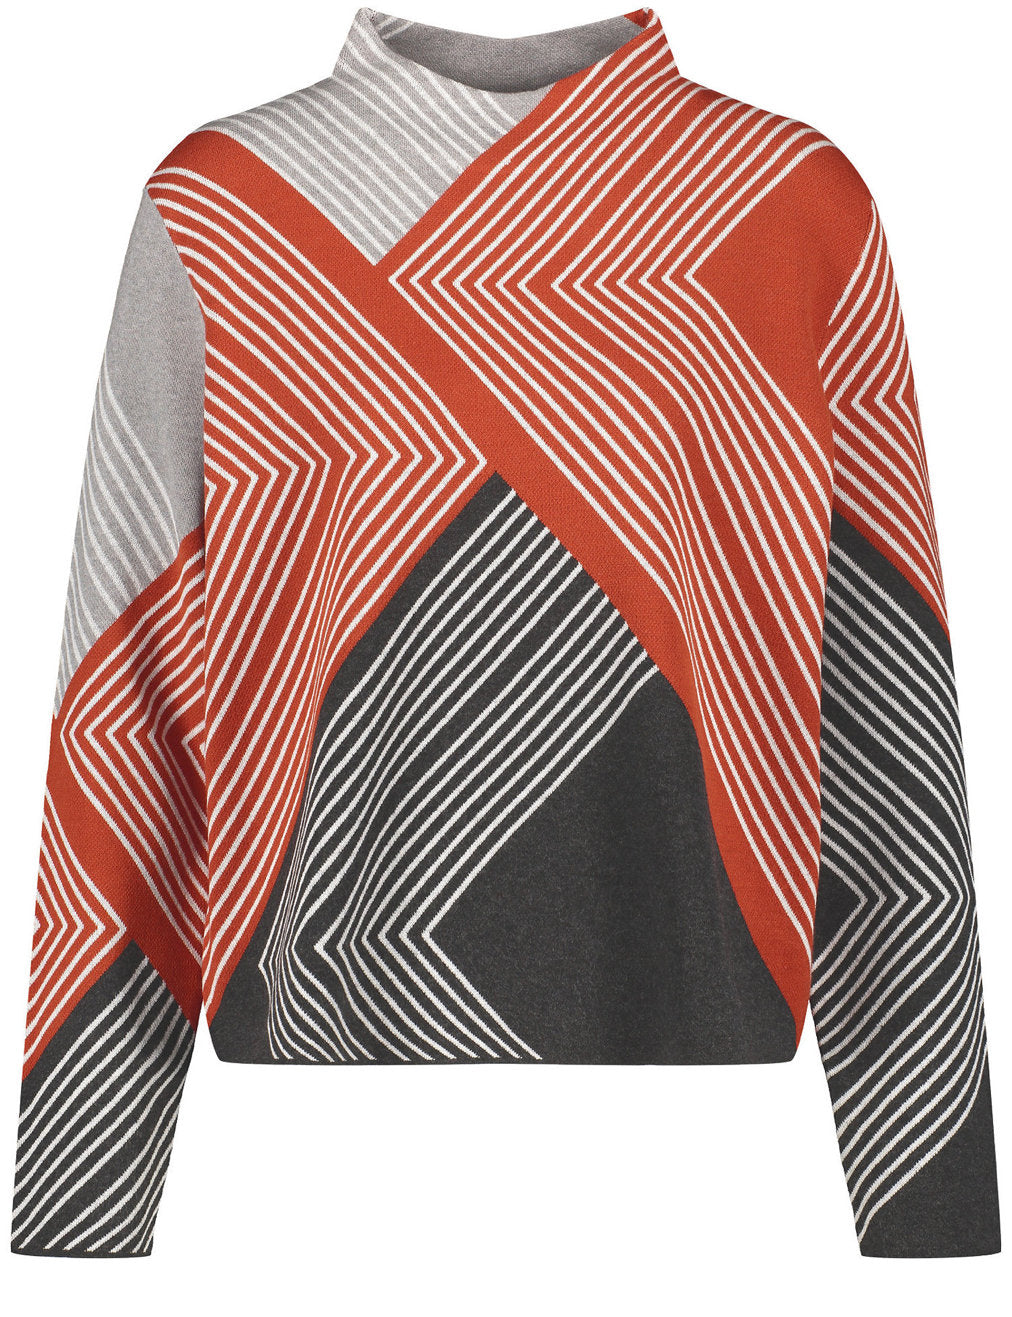 Jumper In A Jacquard Look With A Graphic Pattern_271012-35701_2070_02